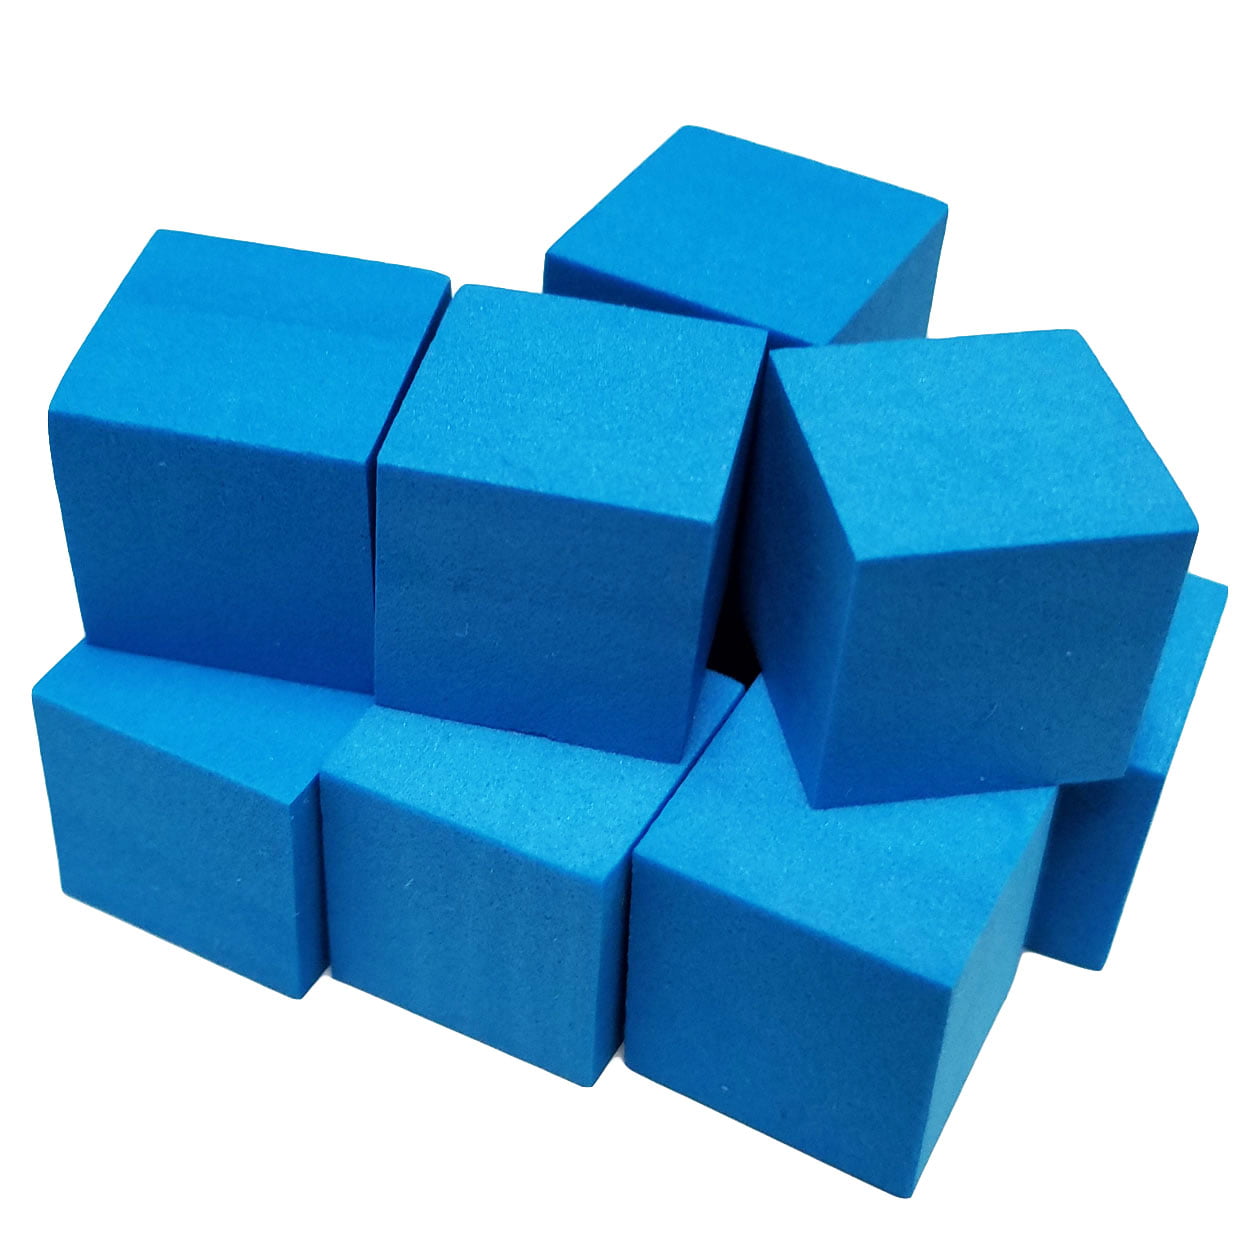 2 Each of 6 Colors Pack of 12 16mm Blank Foam Dice Cubes with Square Corners